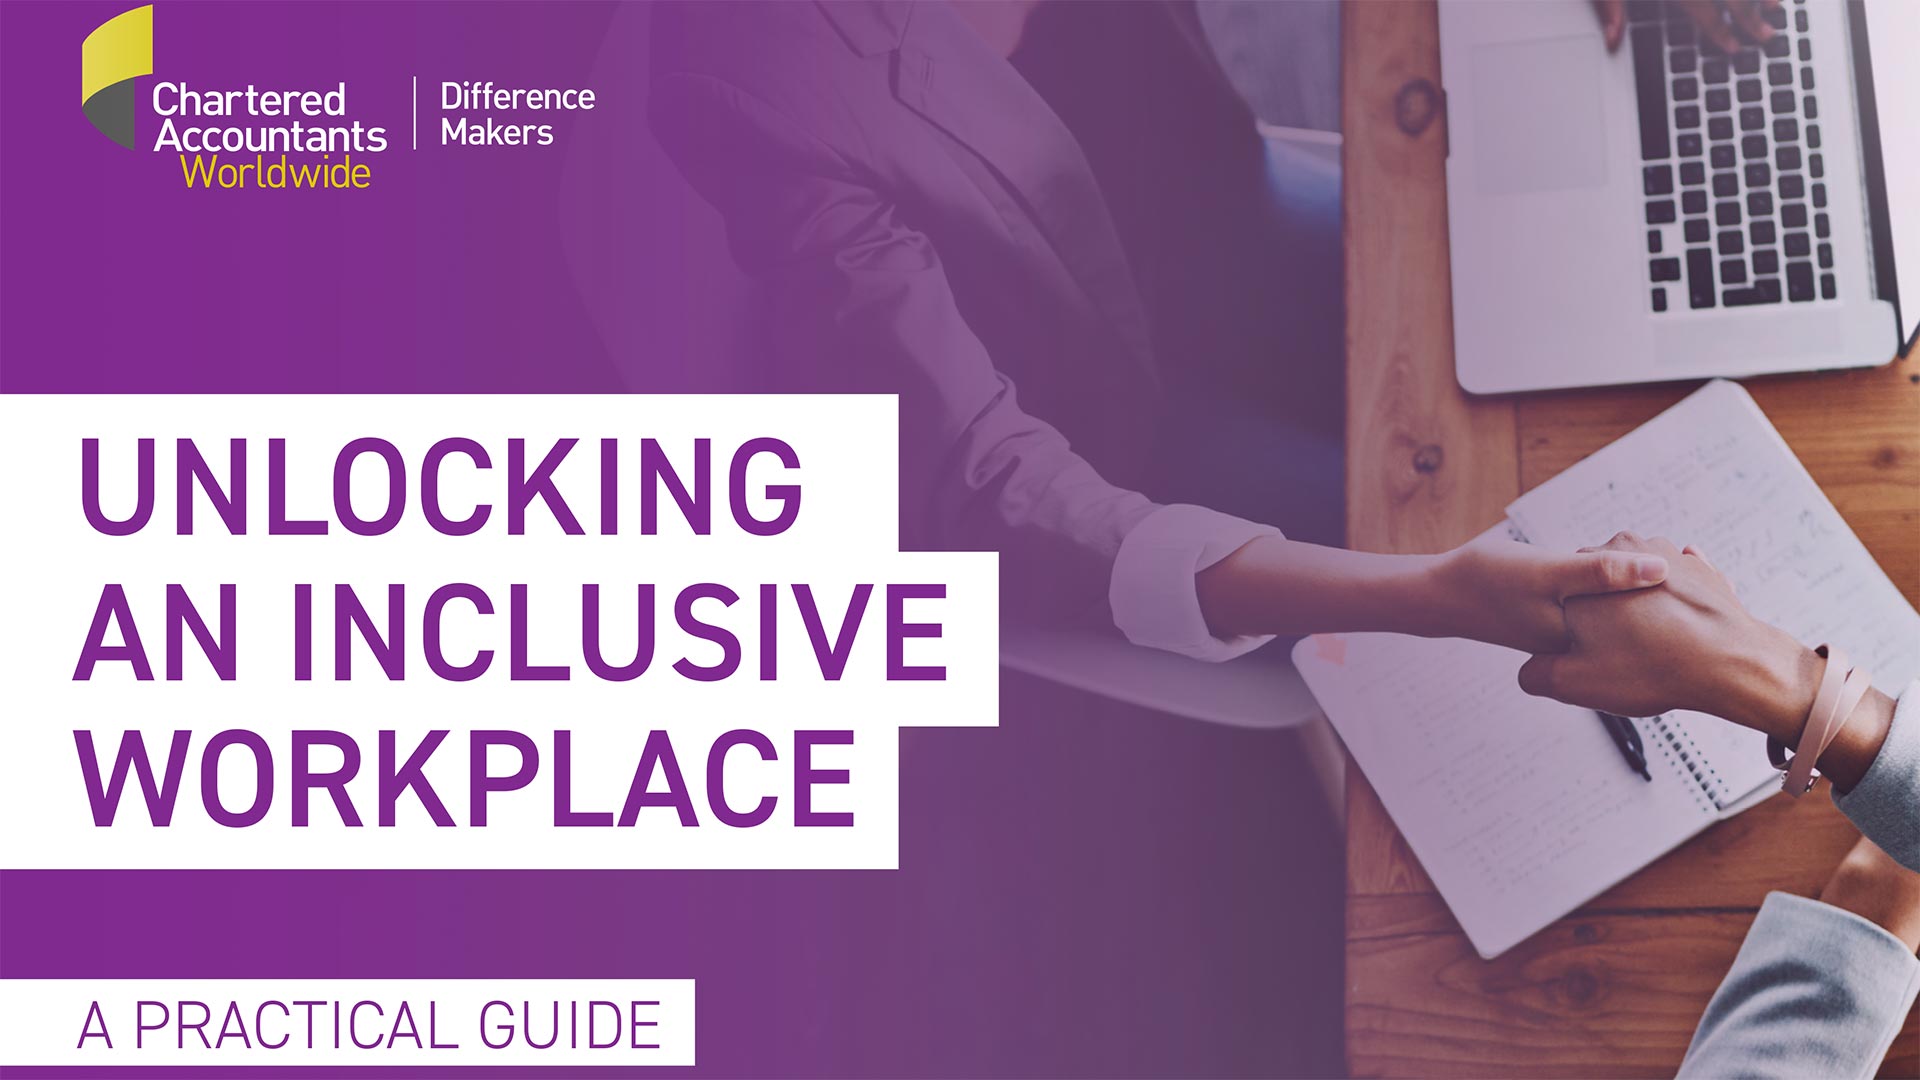 UNLOCKING AN INCLUSIVE WORKPLACE